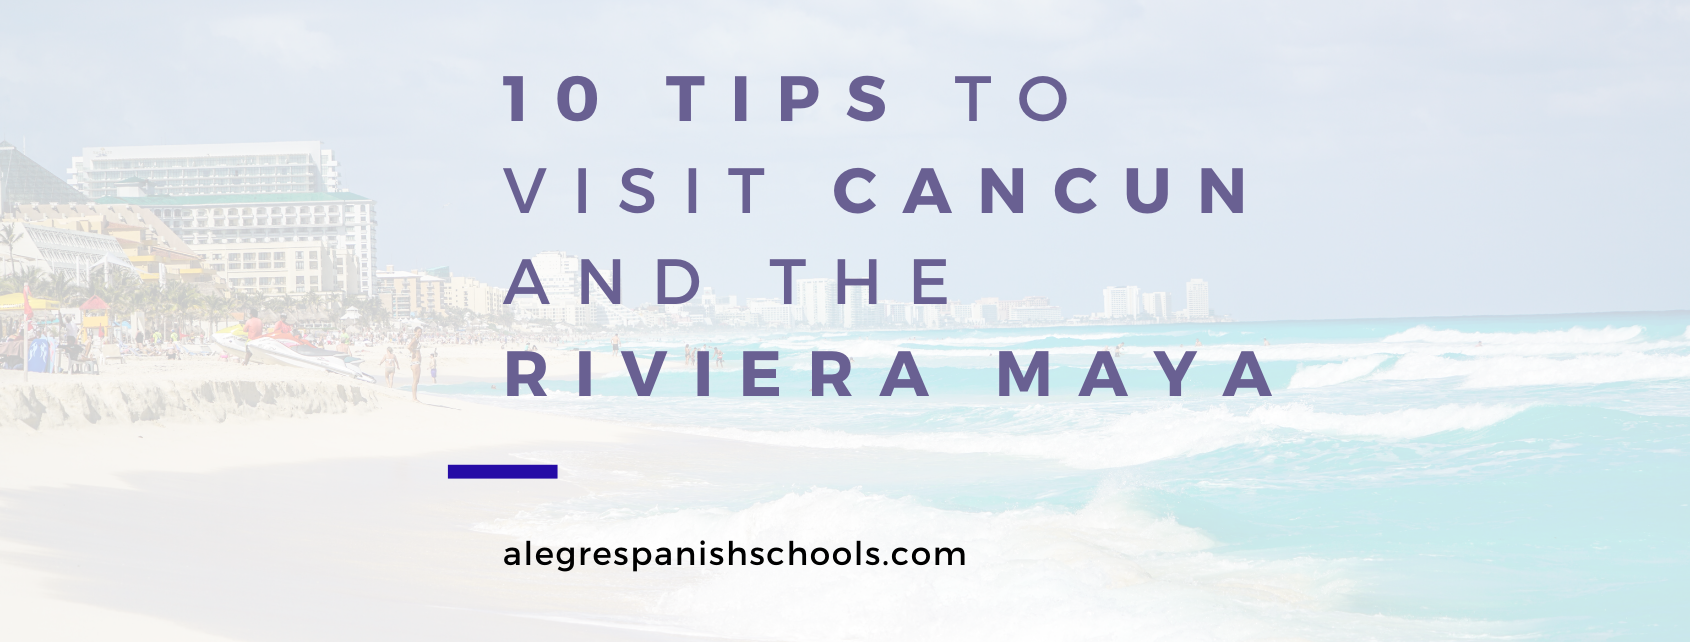 10 tips to visit Cancun and the Riviera Maya-alegre spanish schools